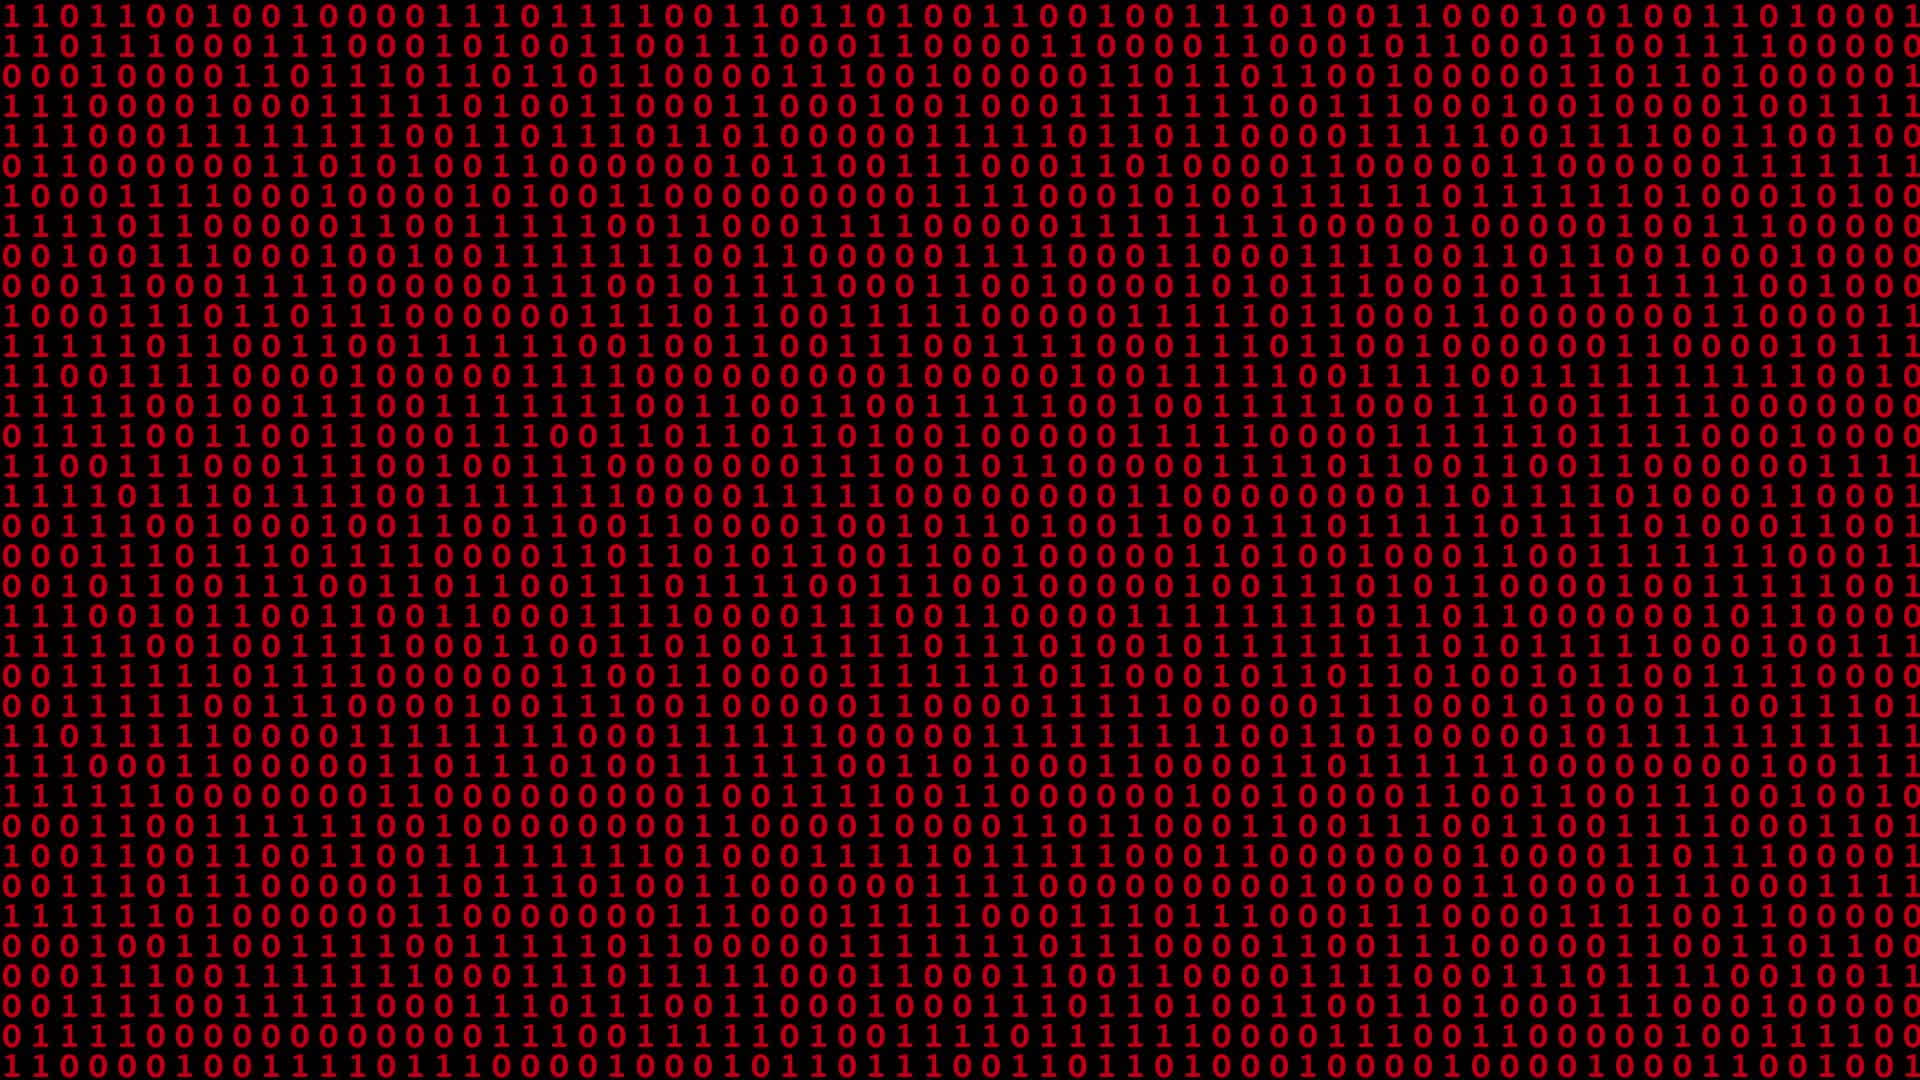 Download 1920x1080 Hd Number Coding Wallpaper 